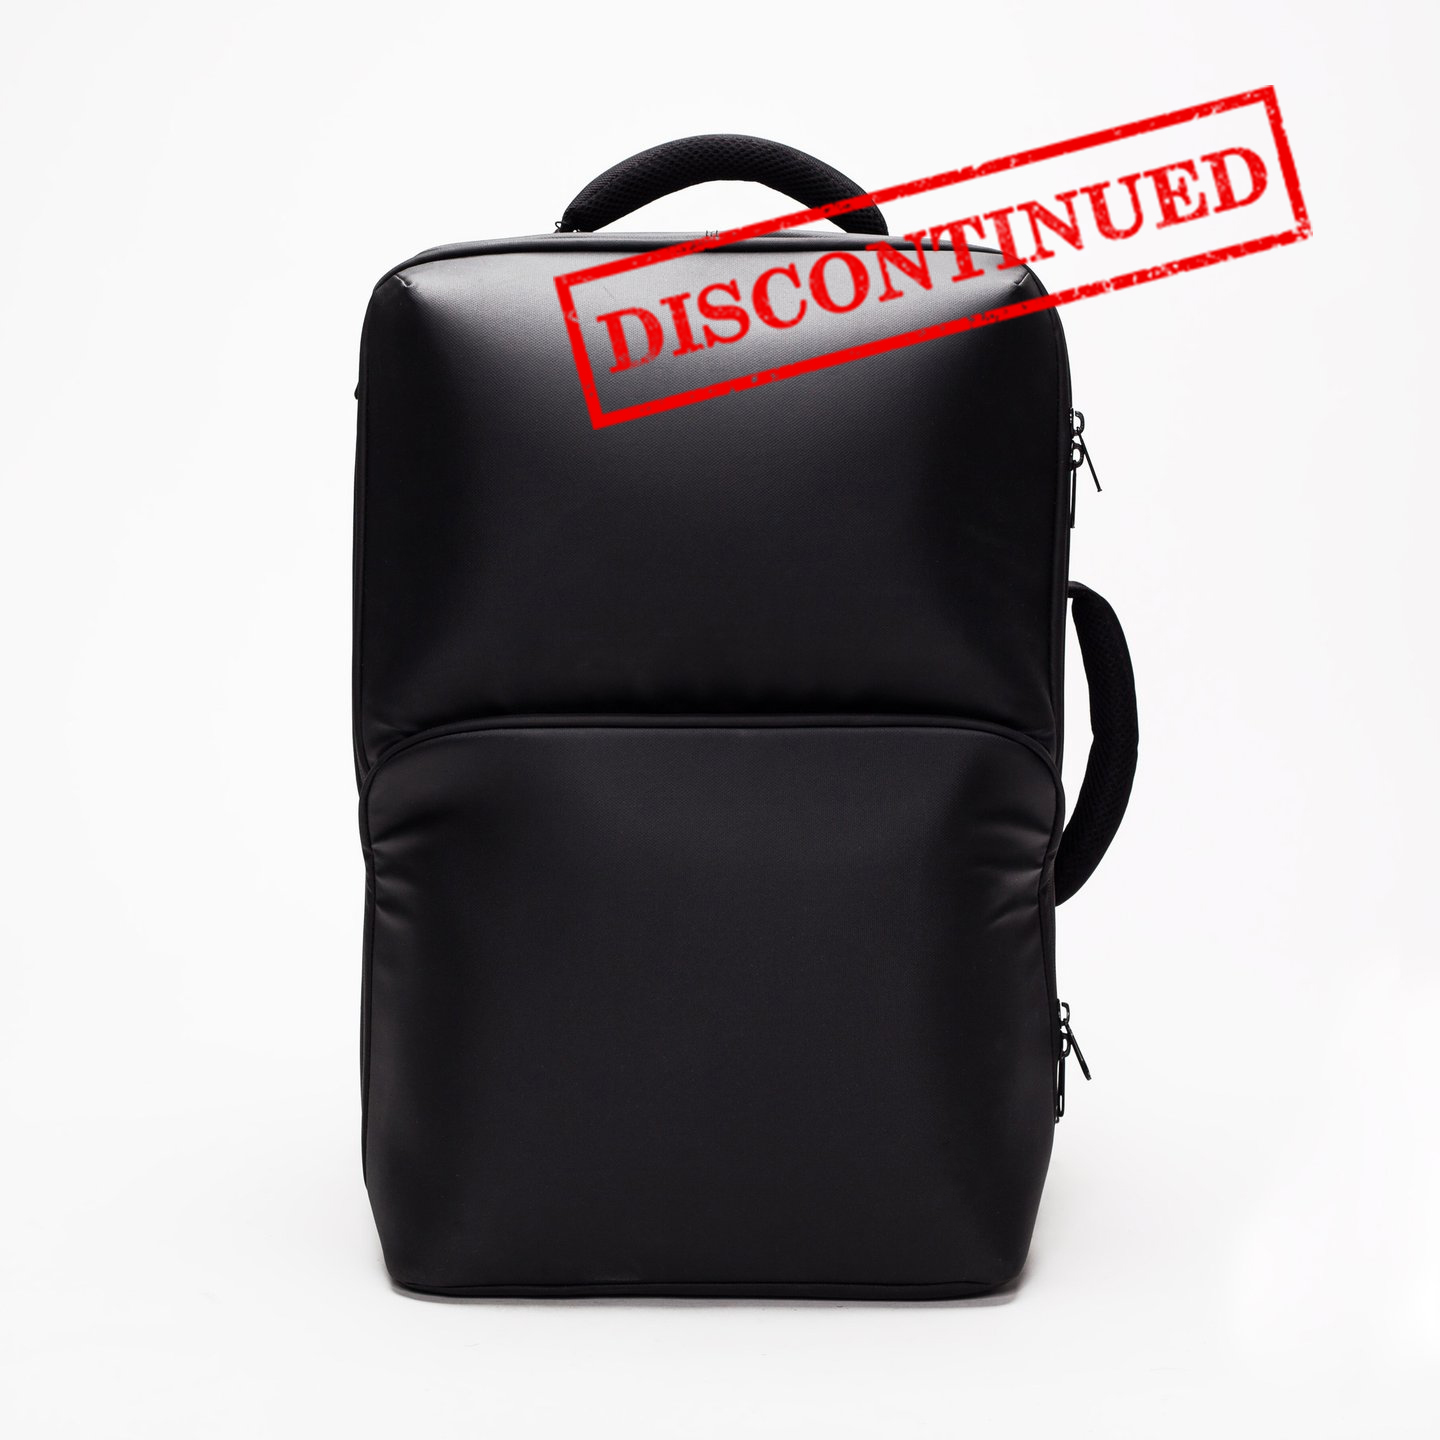 ‘The General’ Backpack DISCONTINUED and No longer Being Sold